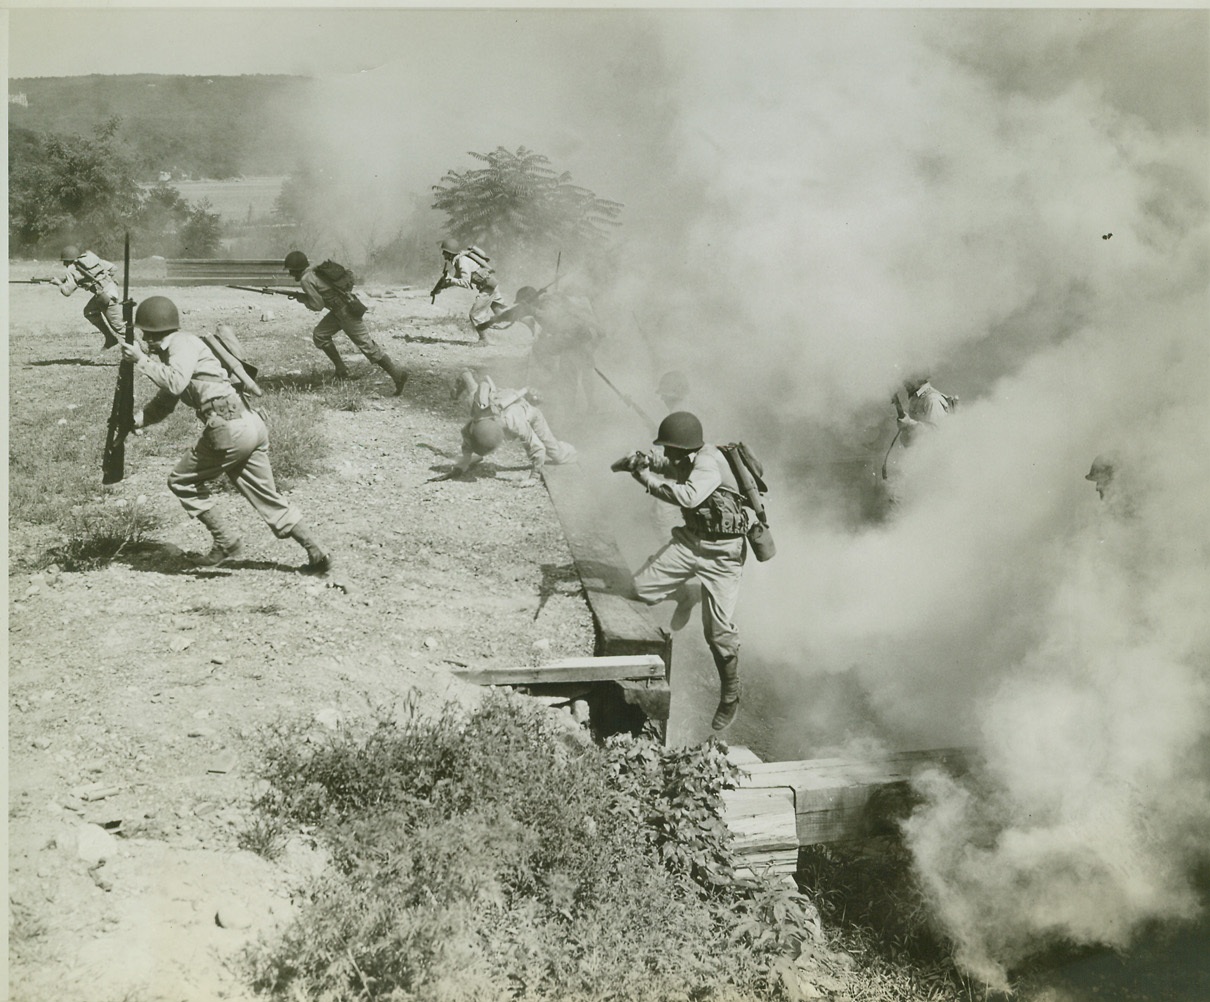 PLEBES GO OVER AND AFTER ‘EM, 8/6/1942. WEST POINT, N.Y. – West Point plebes, on a shin-barking, back-breaking “assault” course, drive through a smoke screen, hurdle a trench and tear after the “enemy”, August 6th. Carrying 22 pounds of equipment each, these boys travel a 200 yard course, hurdling 8-foot log fences, jumping wide trenches, bayoneting dummies that pop out at them unexpectedly, and meet with other obstacles with which they are not familiar. It takes a little more than four action-packed minutes to cover the course, but it teaches the boys to meet and conquer with instantaneous speed, the same sort of surprise obstacles they would meet on the field of battle. Credit: OWI Radiophoto from ACME;